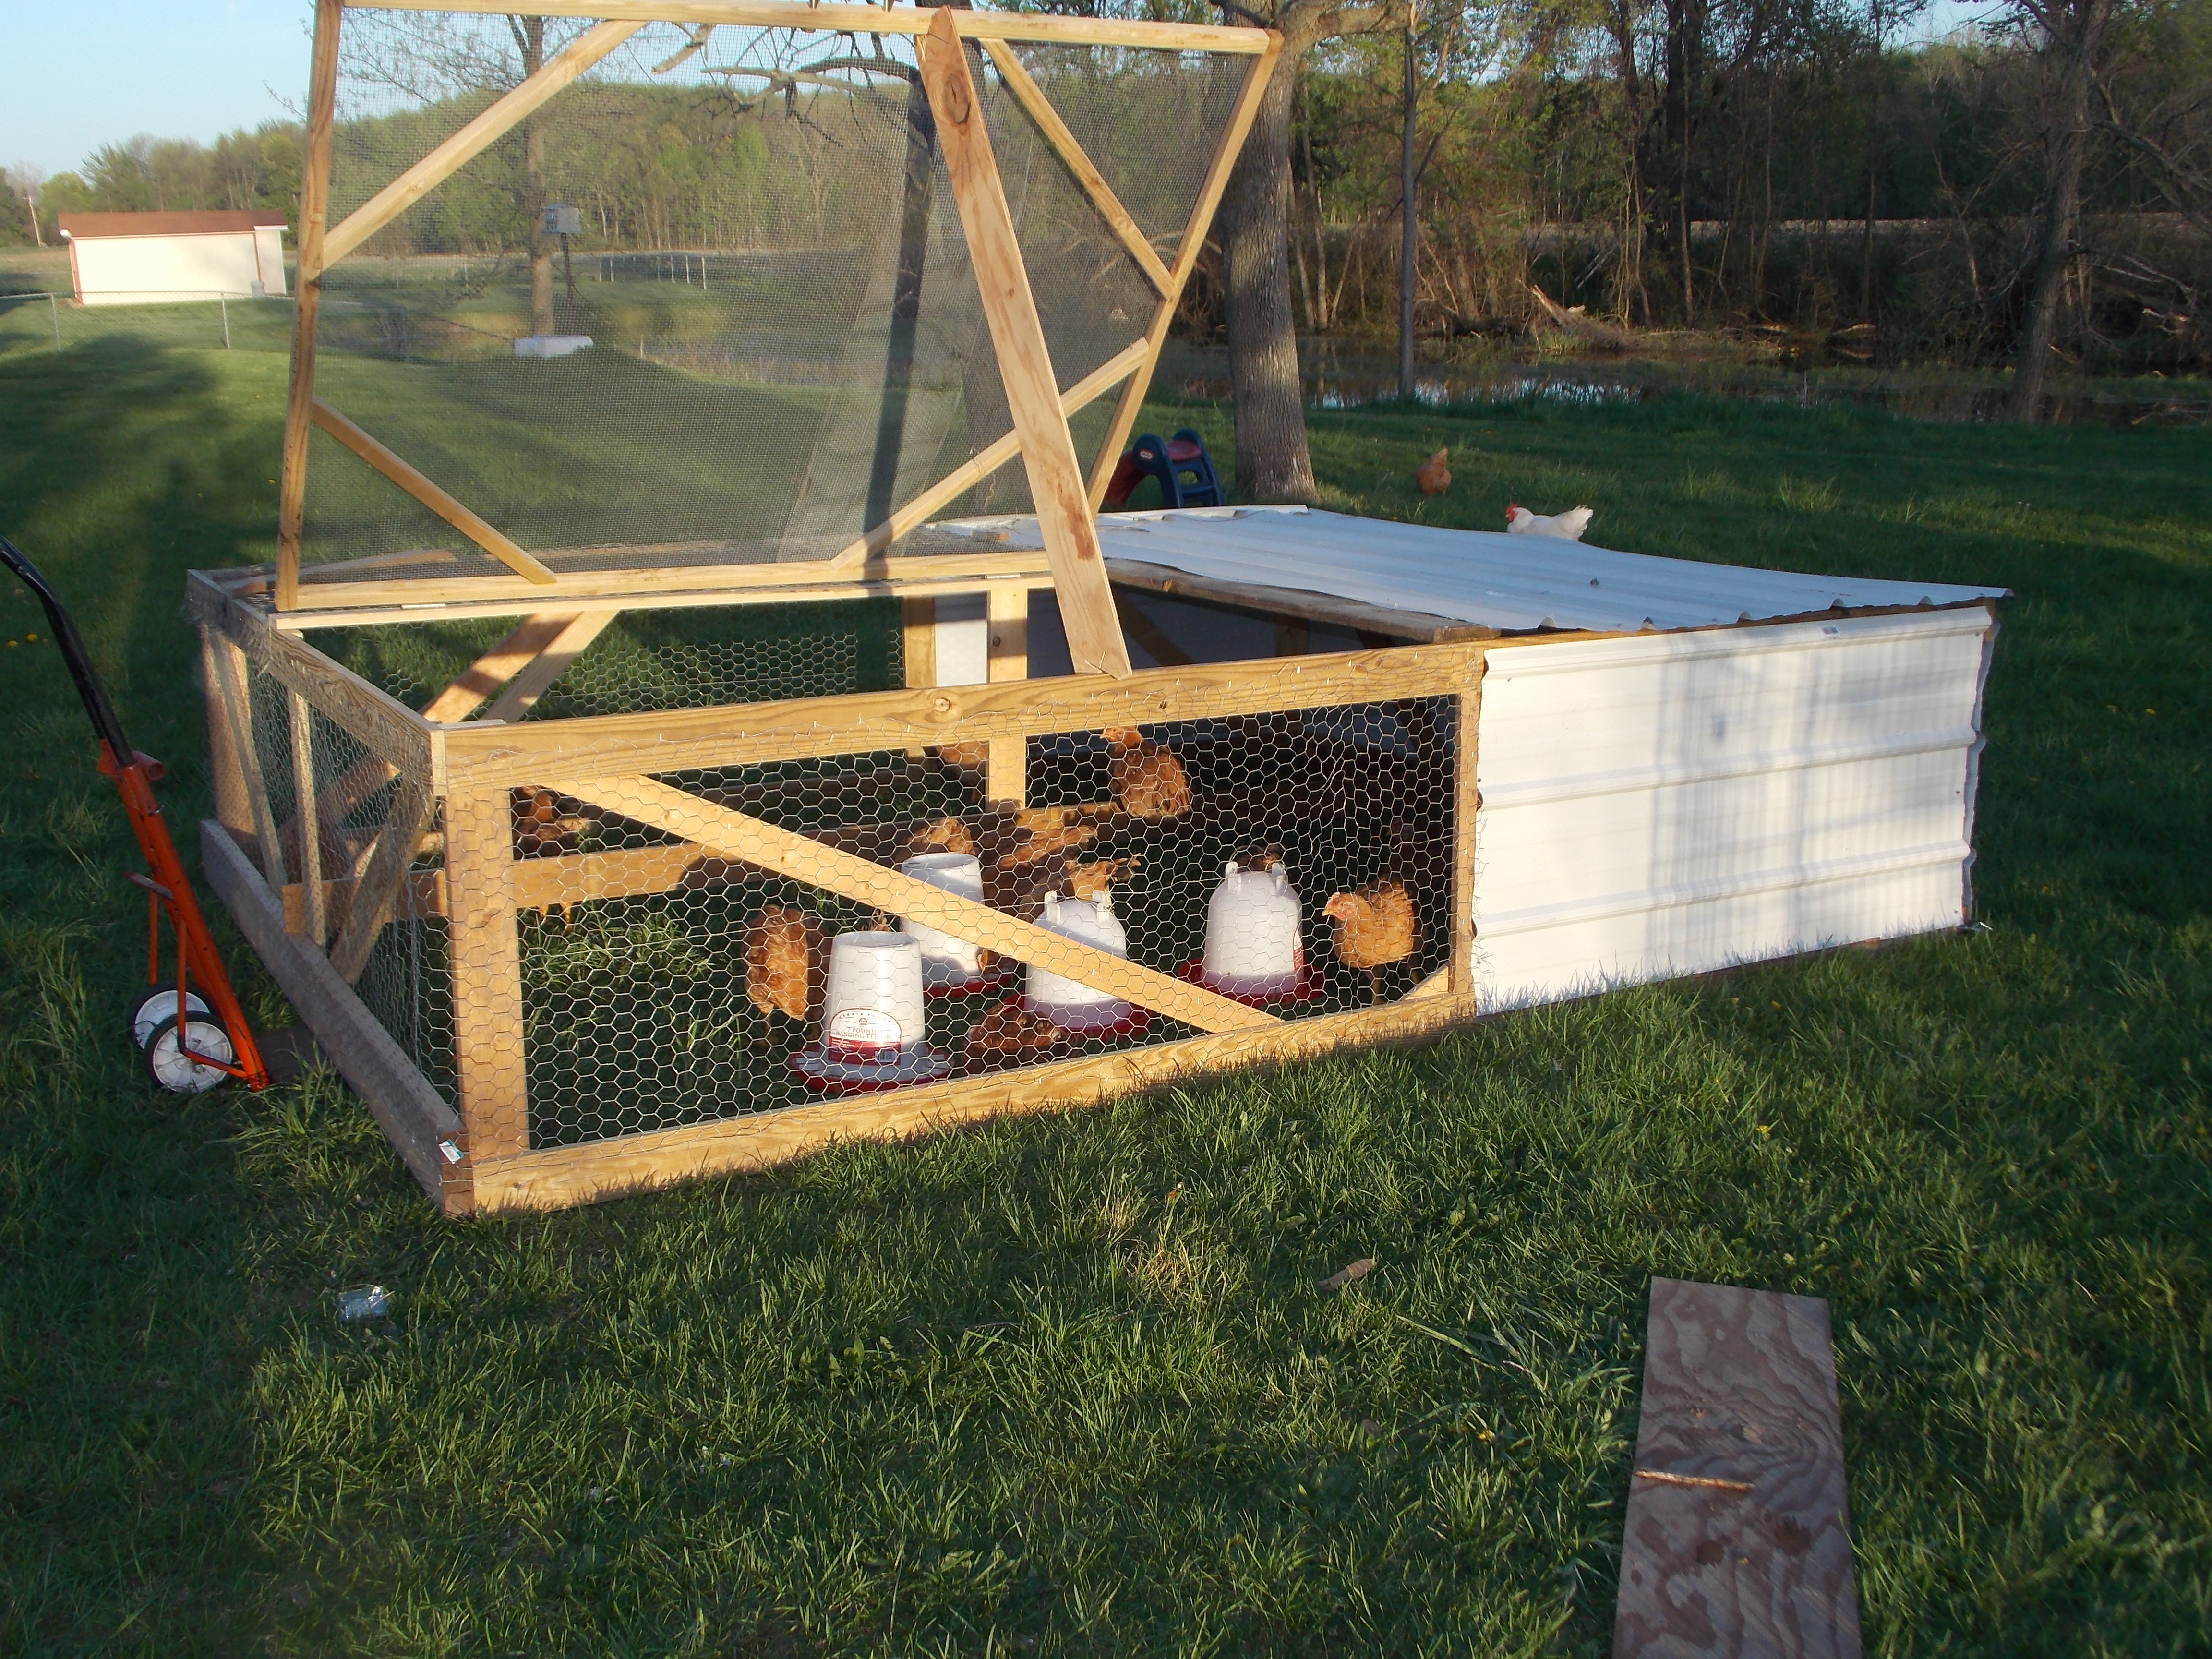 By Sunday night, I guarantee that the chicken tractor will be complete ...